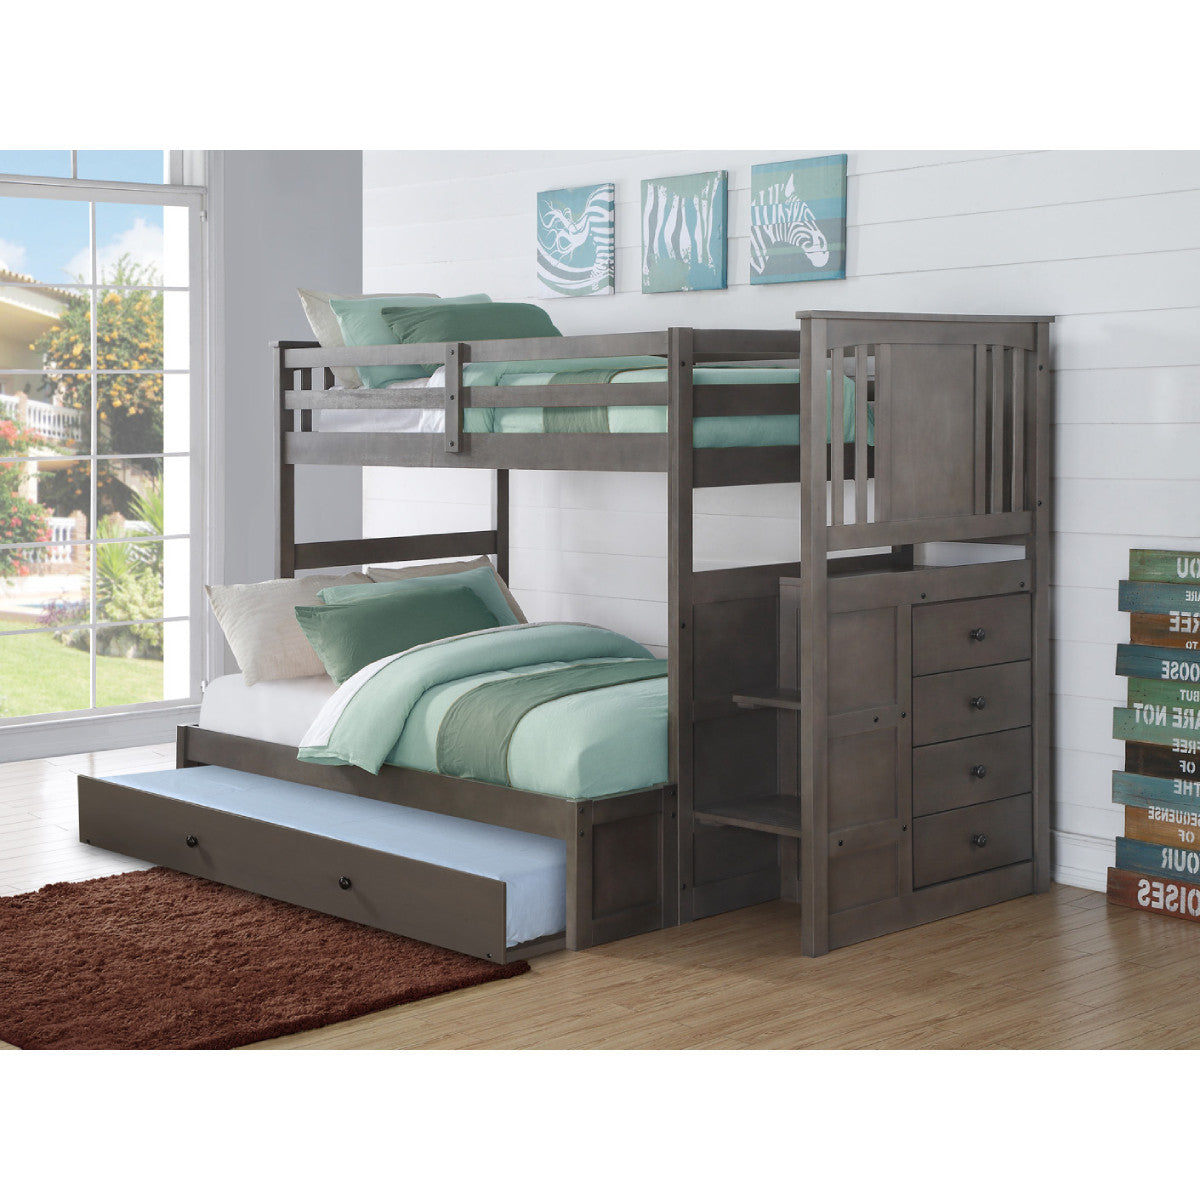 TWIN/FULL PRINCETON STAIRWAY BUNK BED WITH EXT KIT WITH TRUNDLE BED SLATE GREY